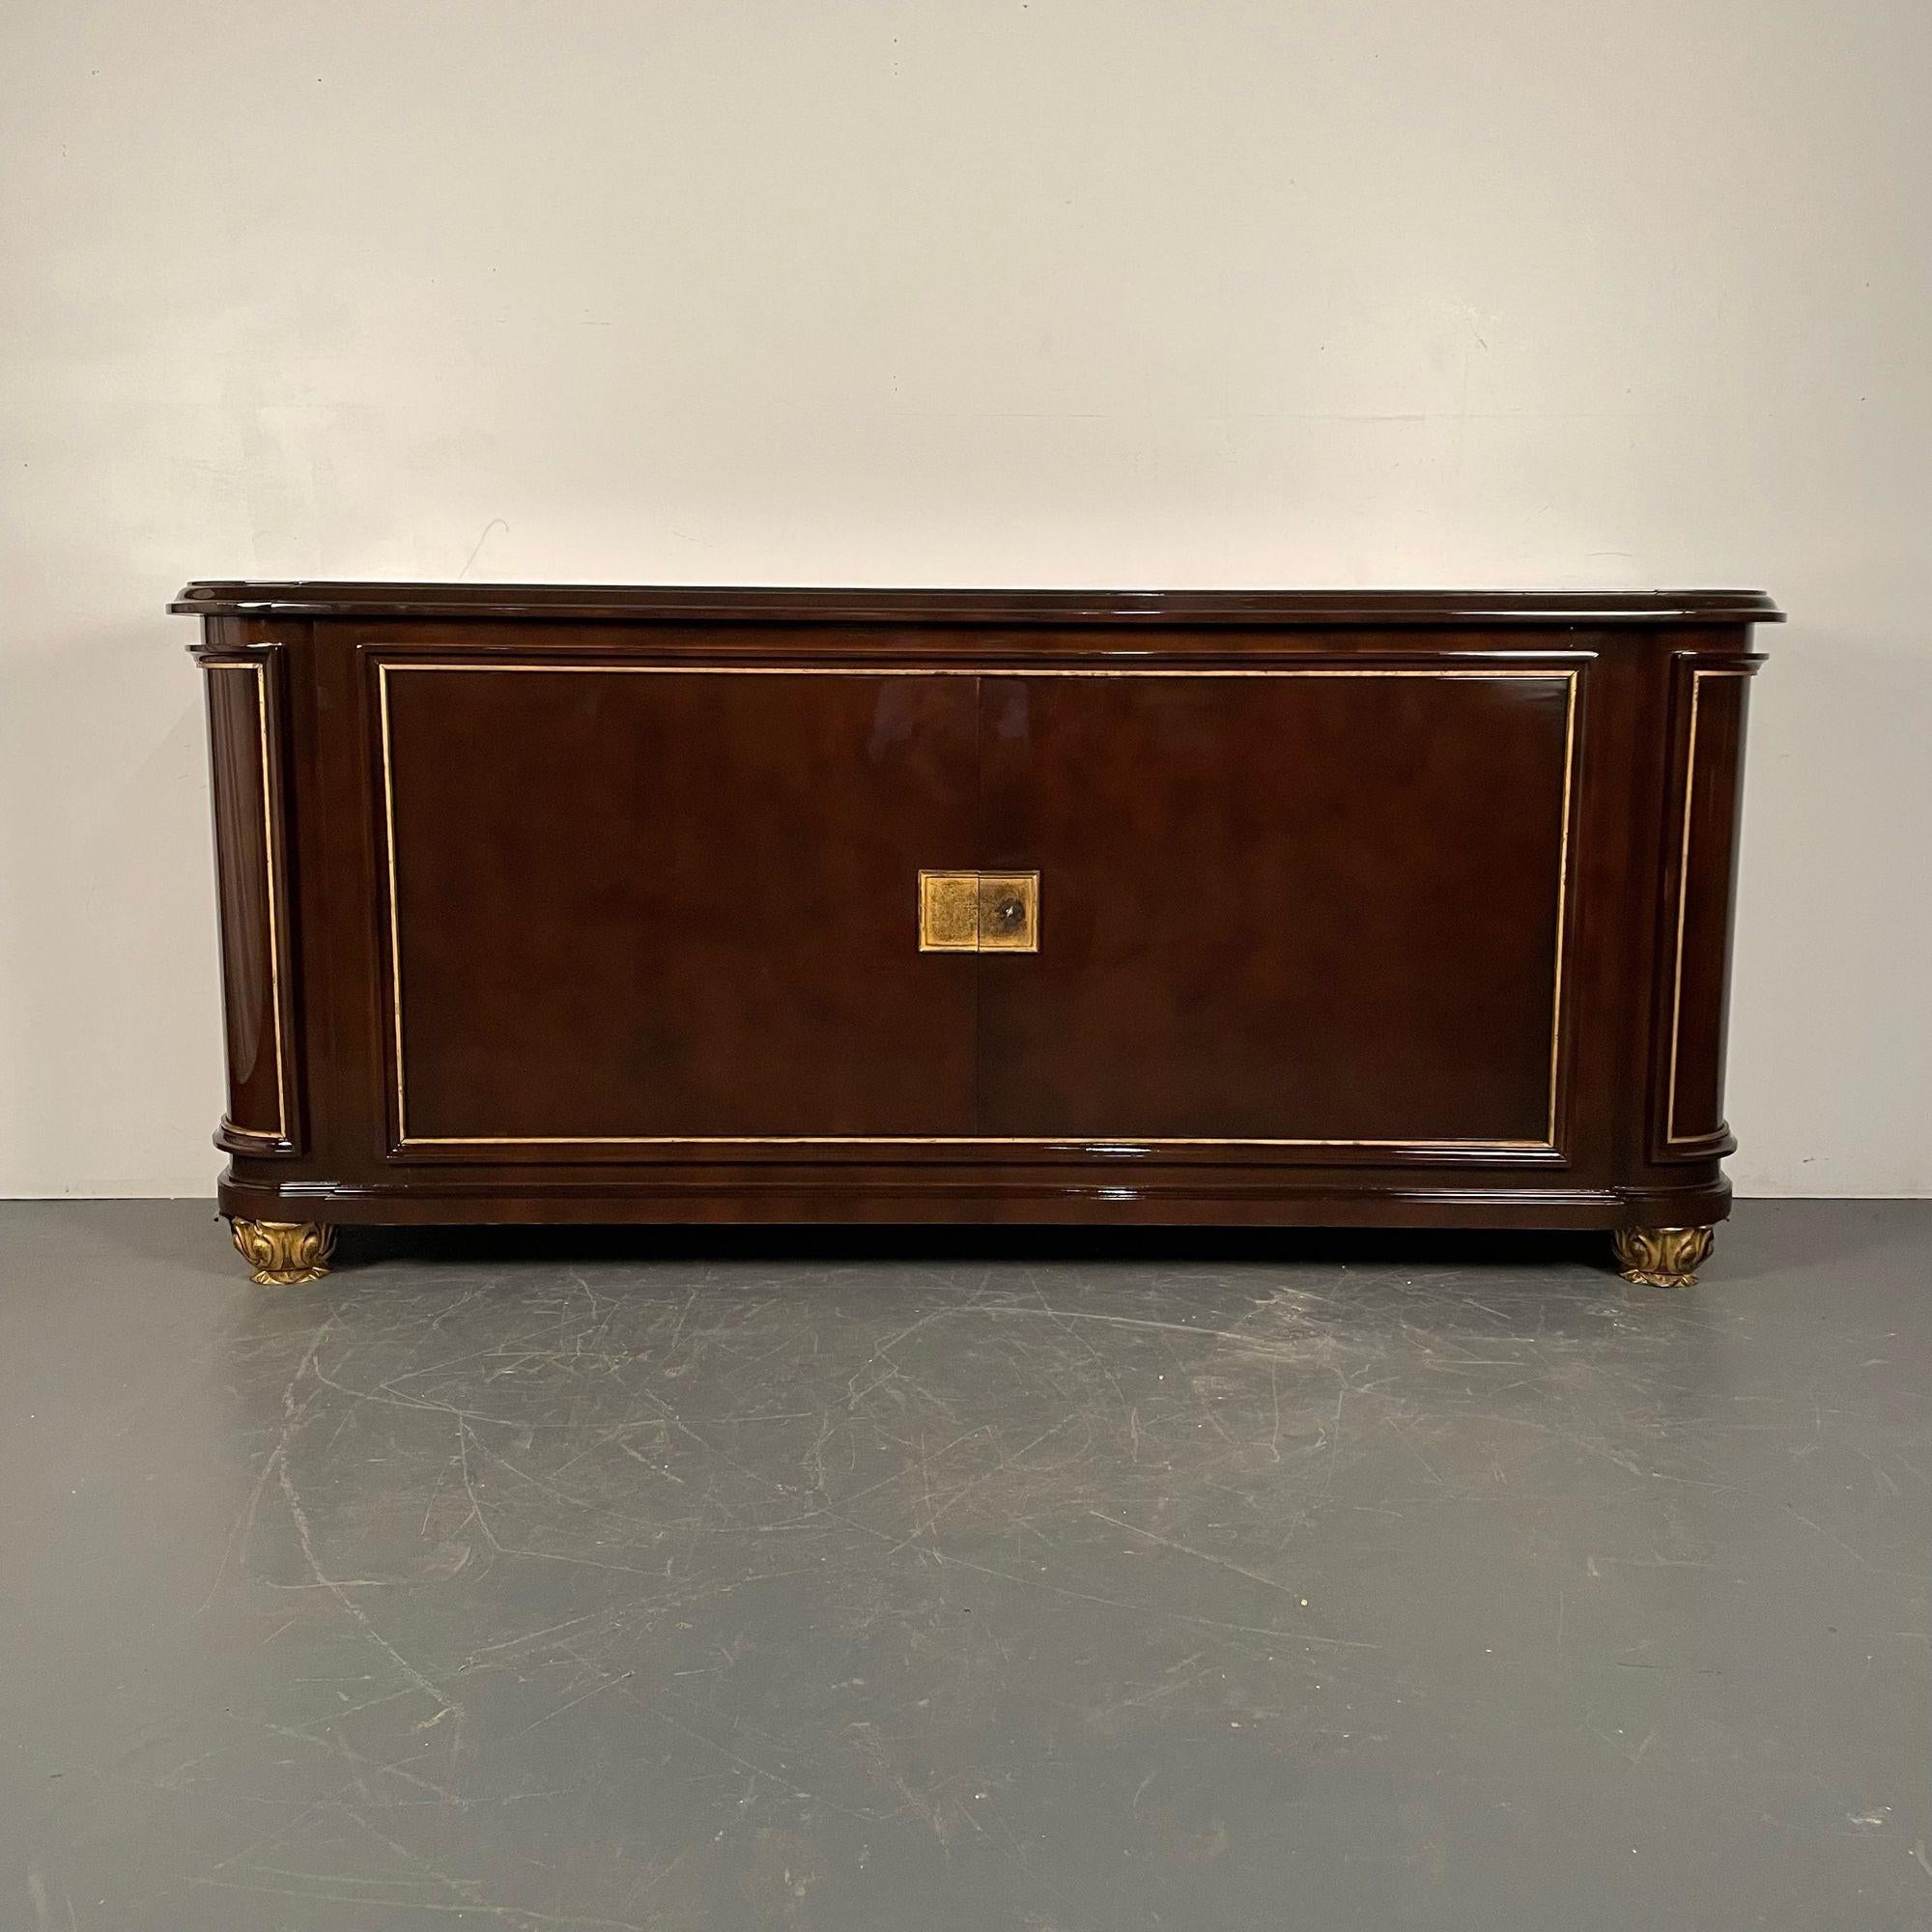 Rene Drouet, French Art Deco, Sideboard, Brown Lacquer, Gilt, France, 1940s In Good Condition For Sale In Stamford, CT